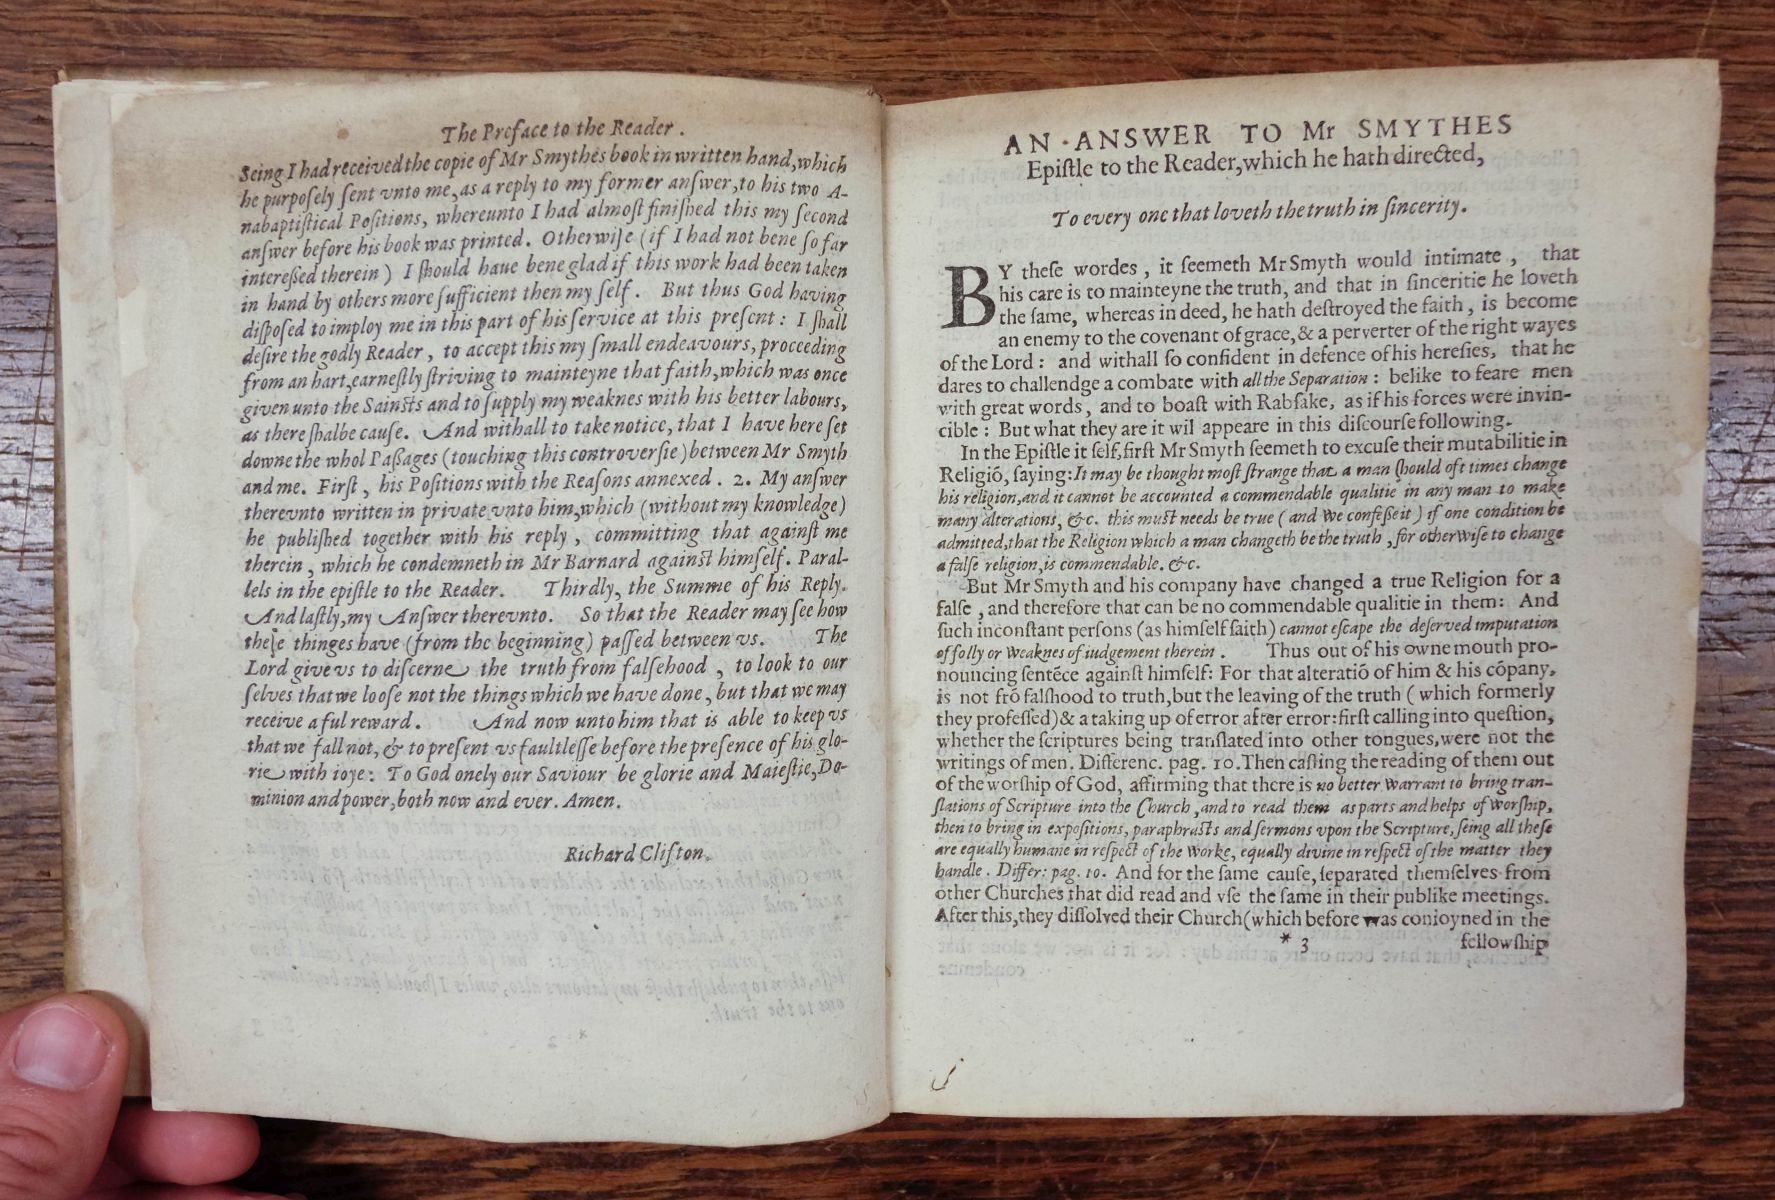 Clifton (Richard). The Plea for Infants and Elder People, 1610 - Image 9 of 14